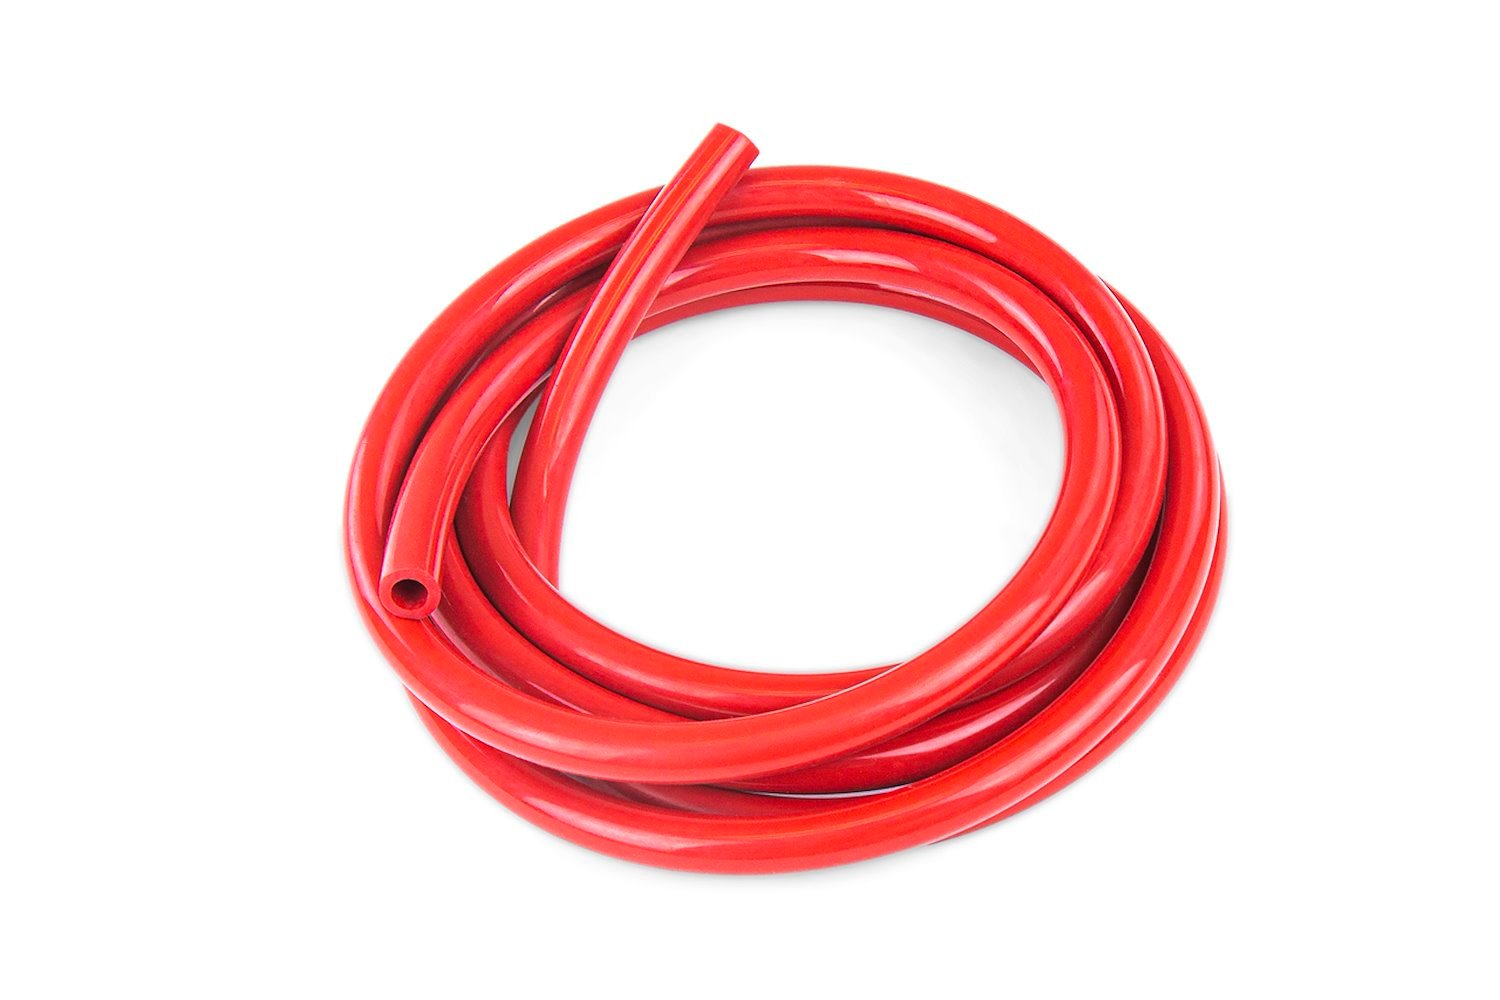 HTSVH4-REDx5 High-Temperature Silicone Vacuum Hose Tubing, 5/32 in. ID, 5 ft. Roll, Red